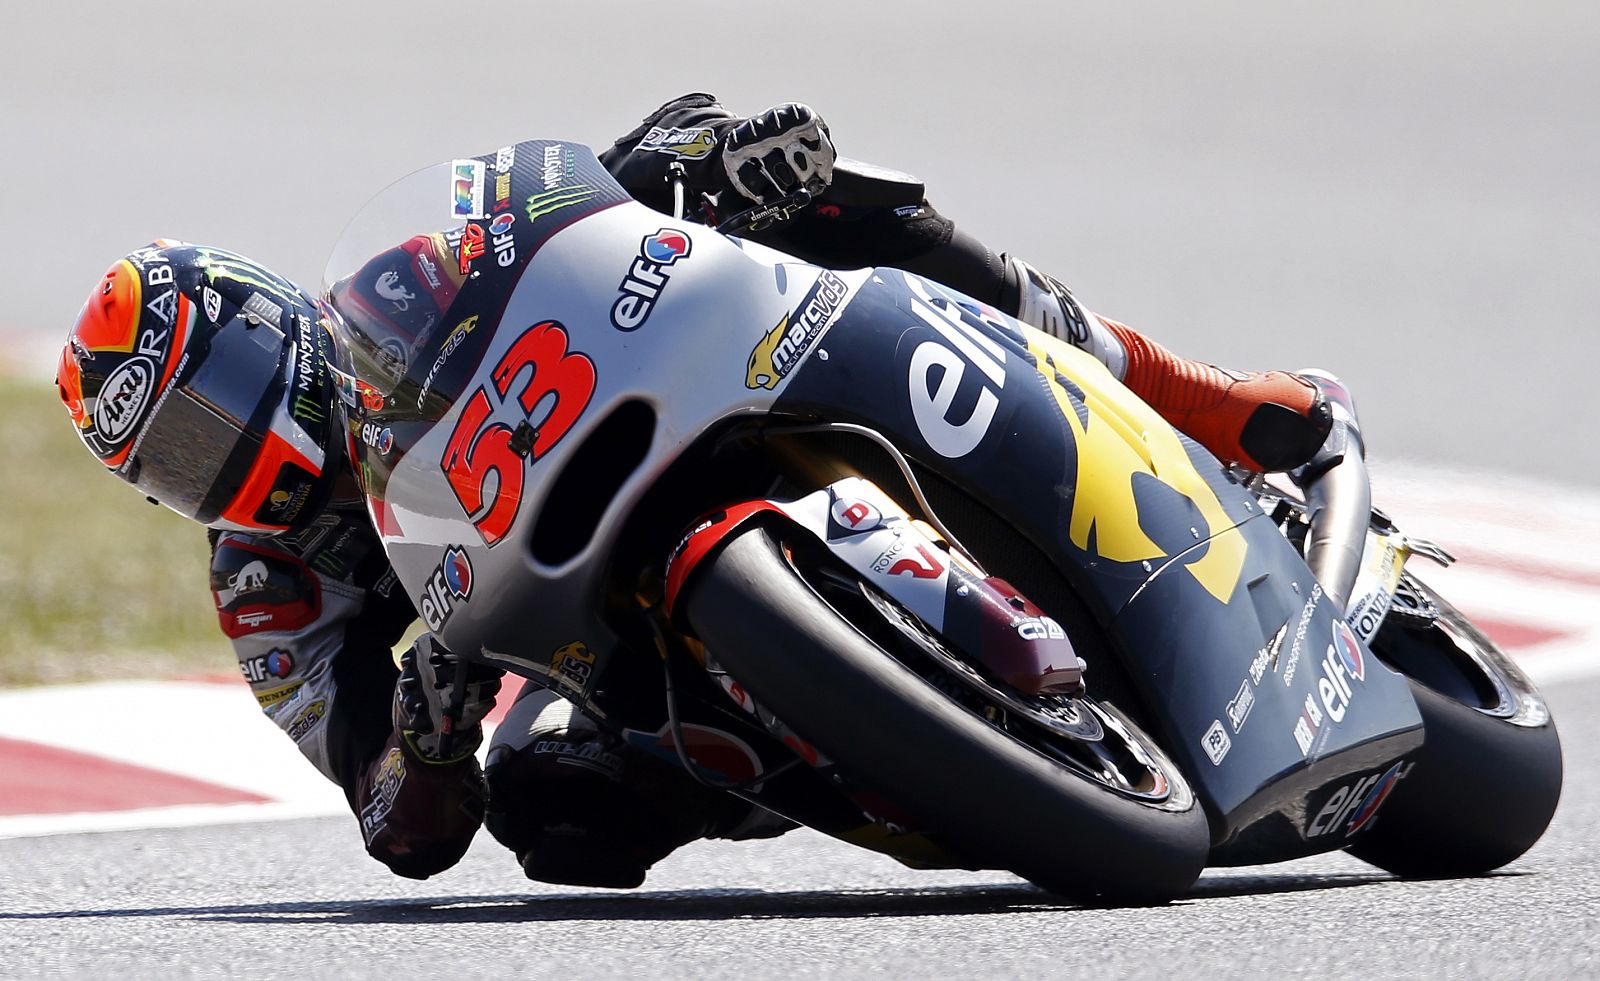 Kalex Moto2 rider Rabat of Spain takes a curve during the fourth free practice at the Catalunya Grand Prix in Montmelo